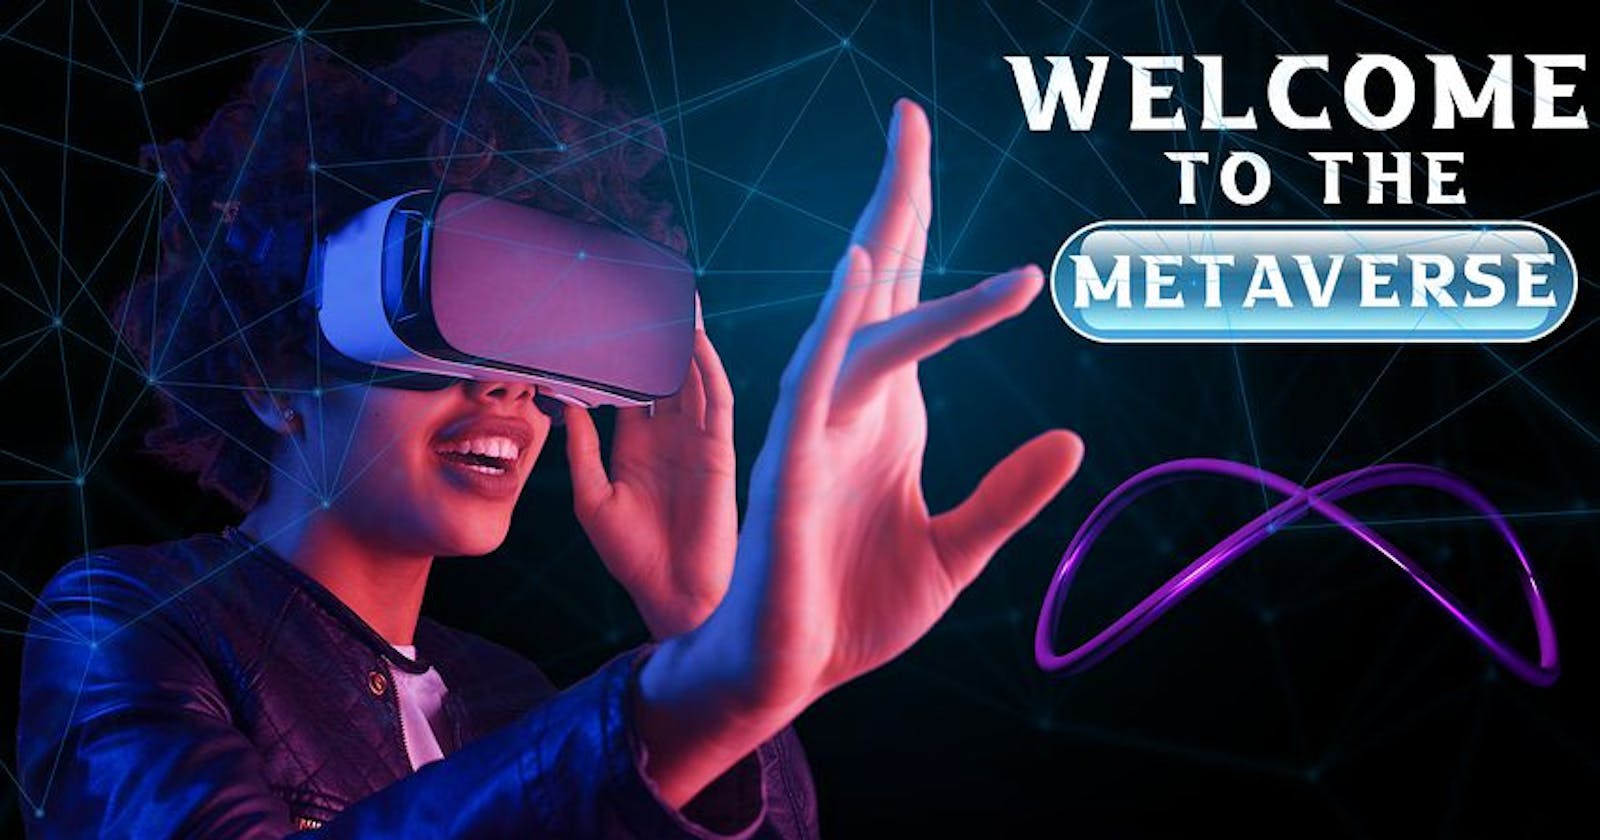 What You Need To Know About The Metaverse